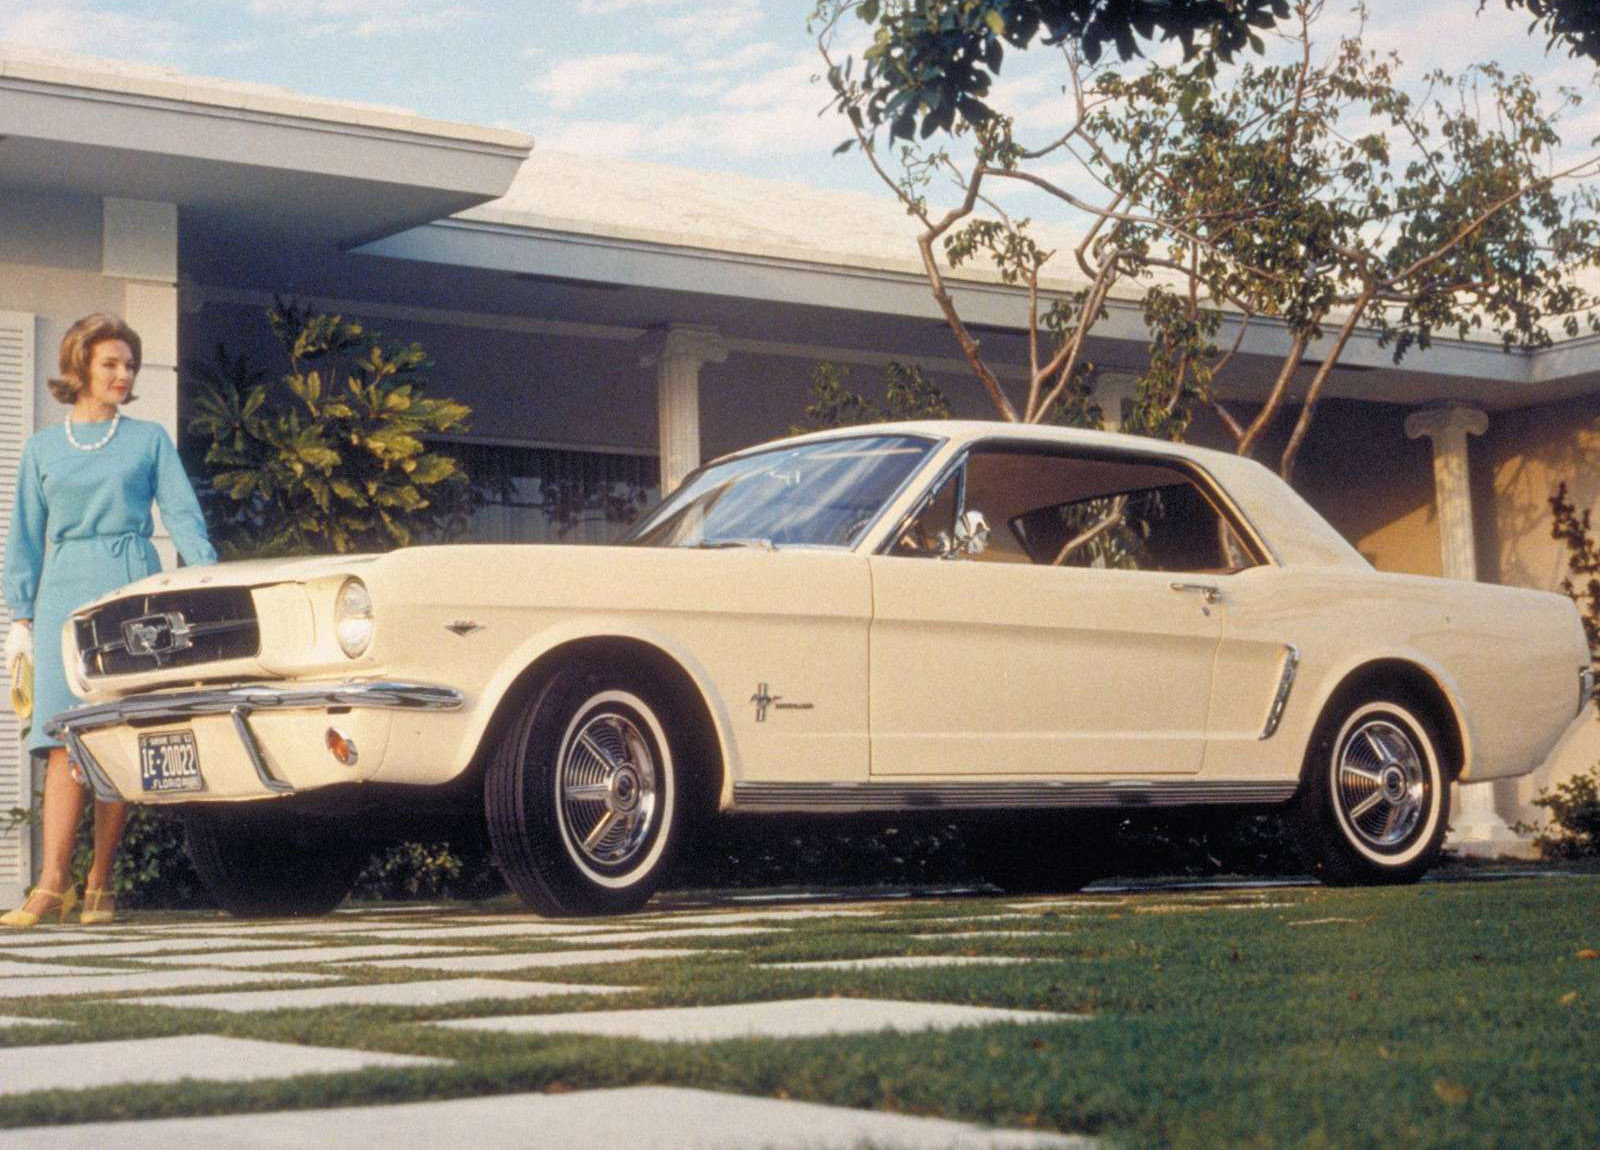 Ford Mustang photo #1